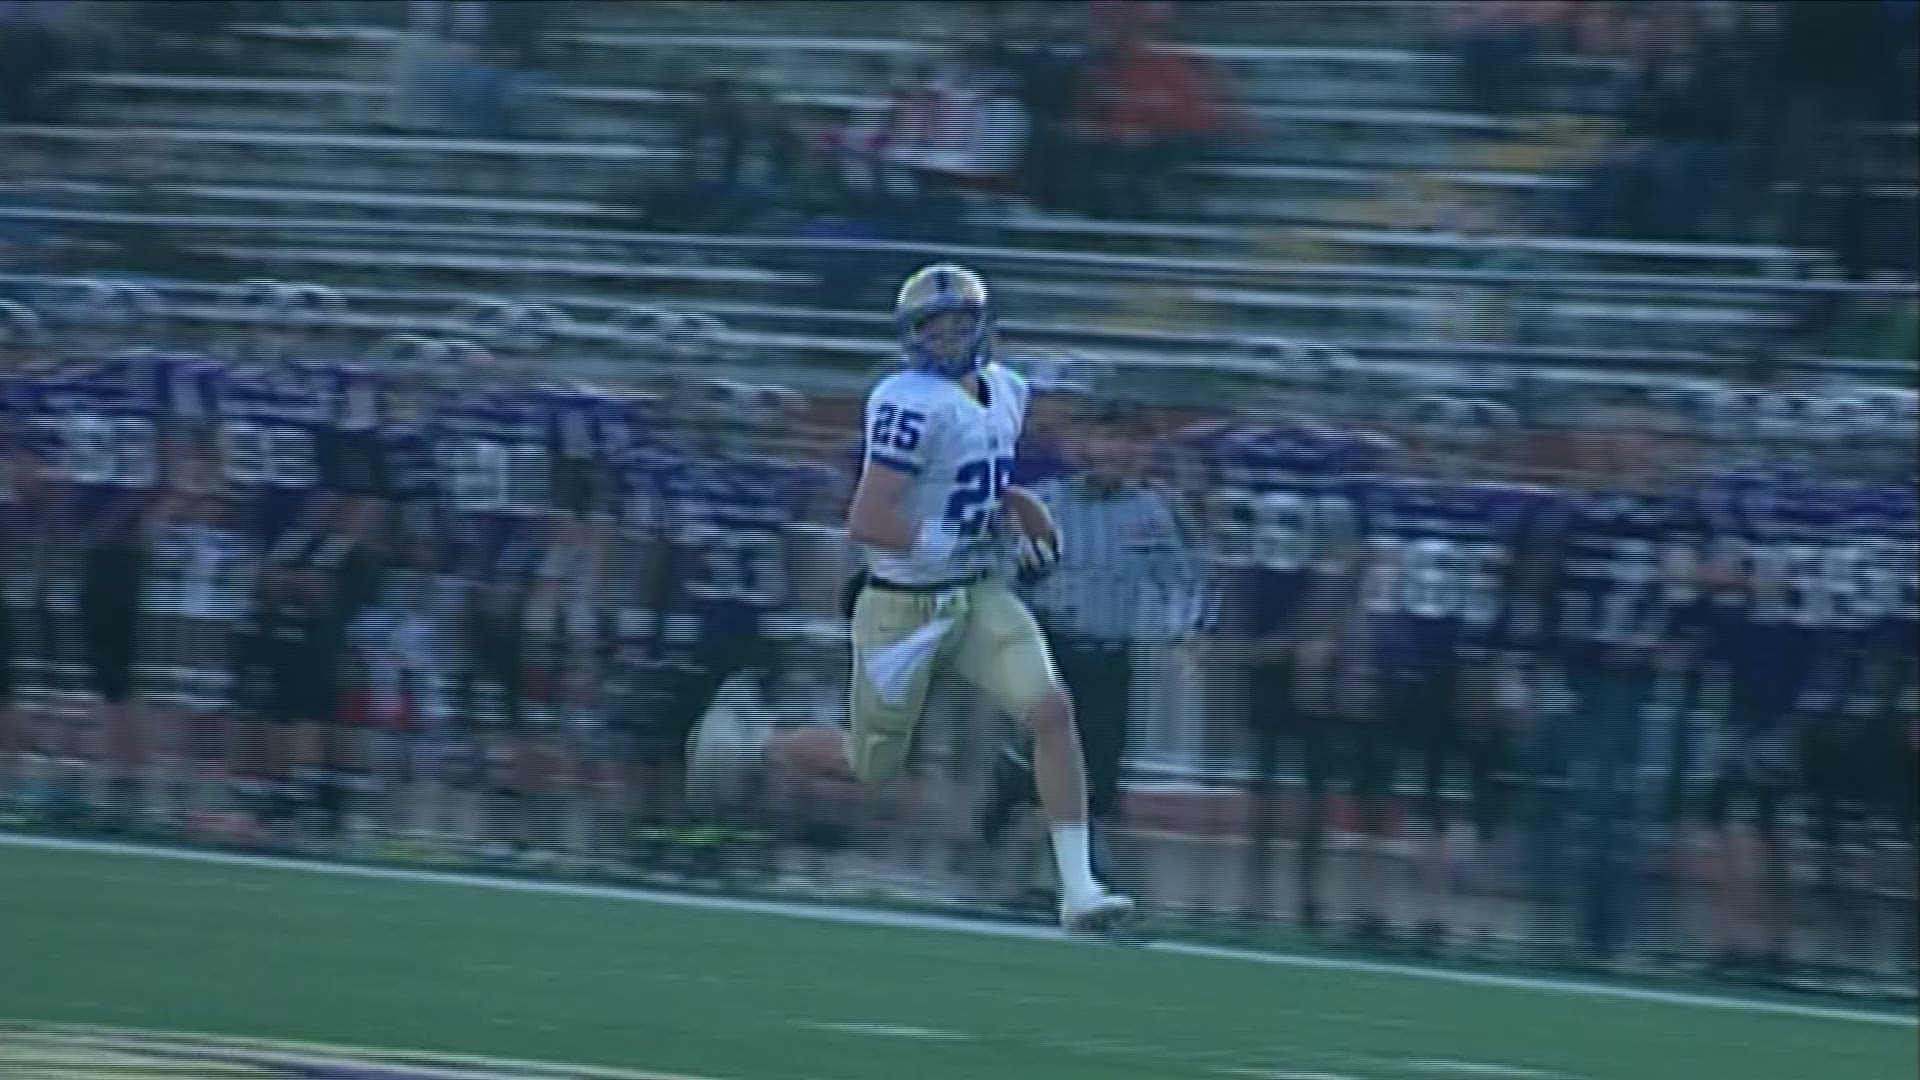 Archive video from CAK's state championship wins in 2011 and 2012.